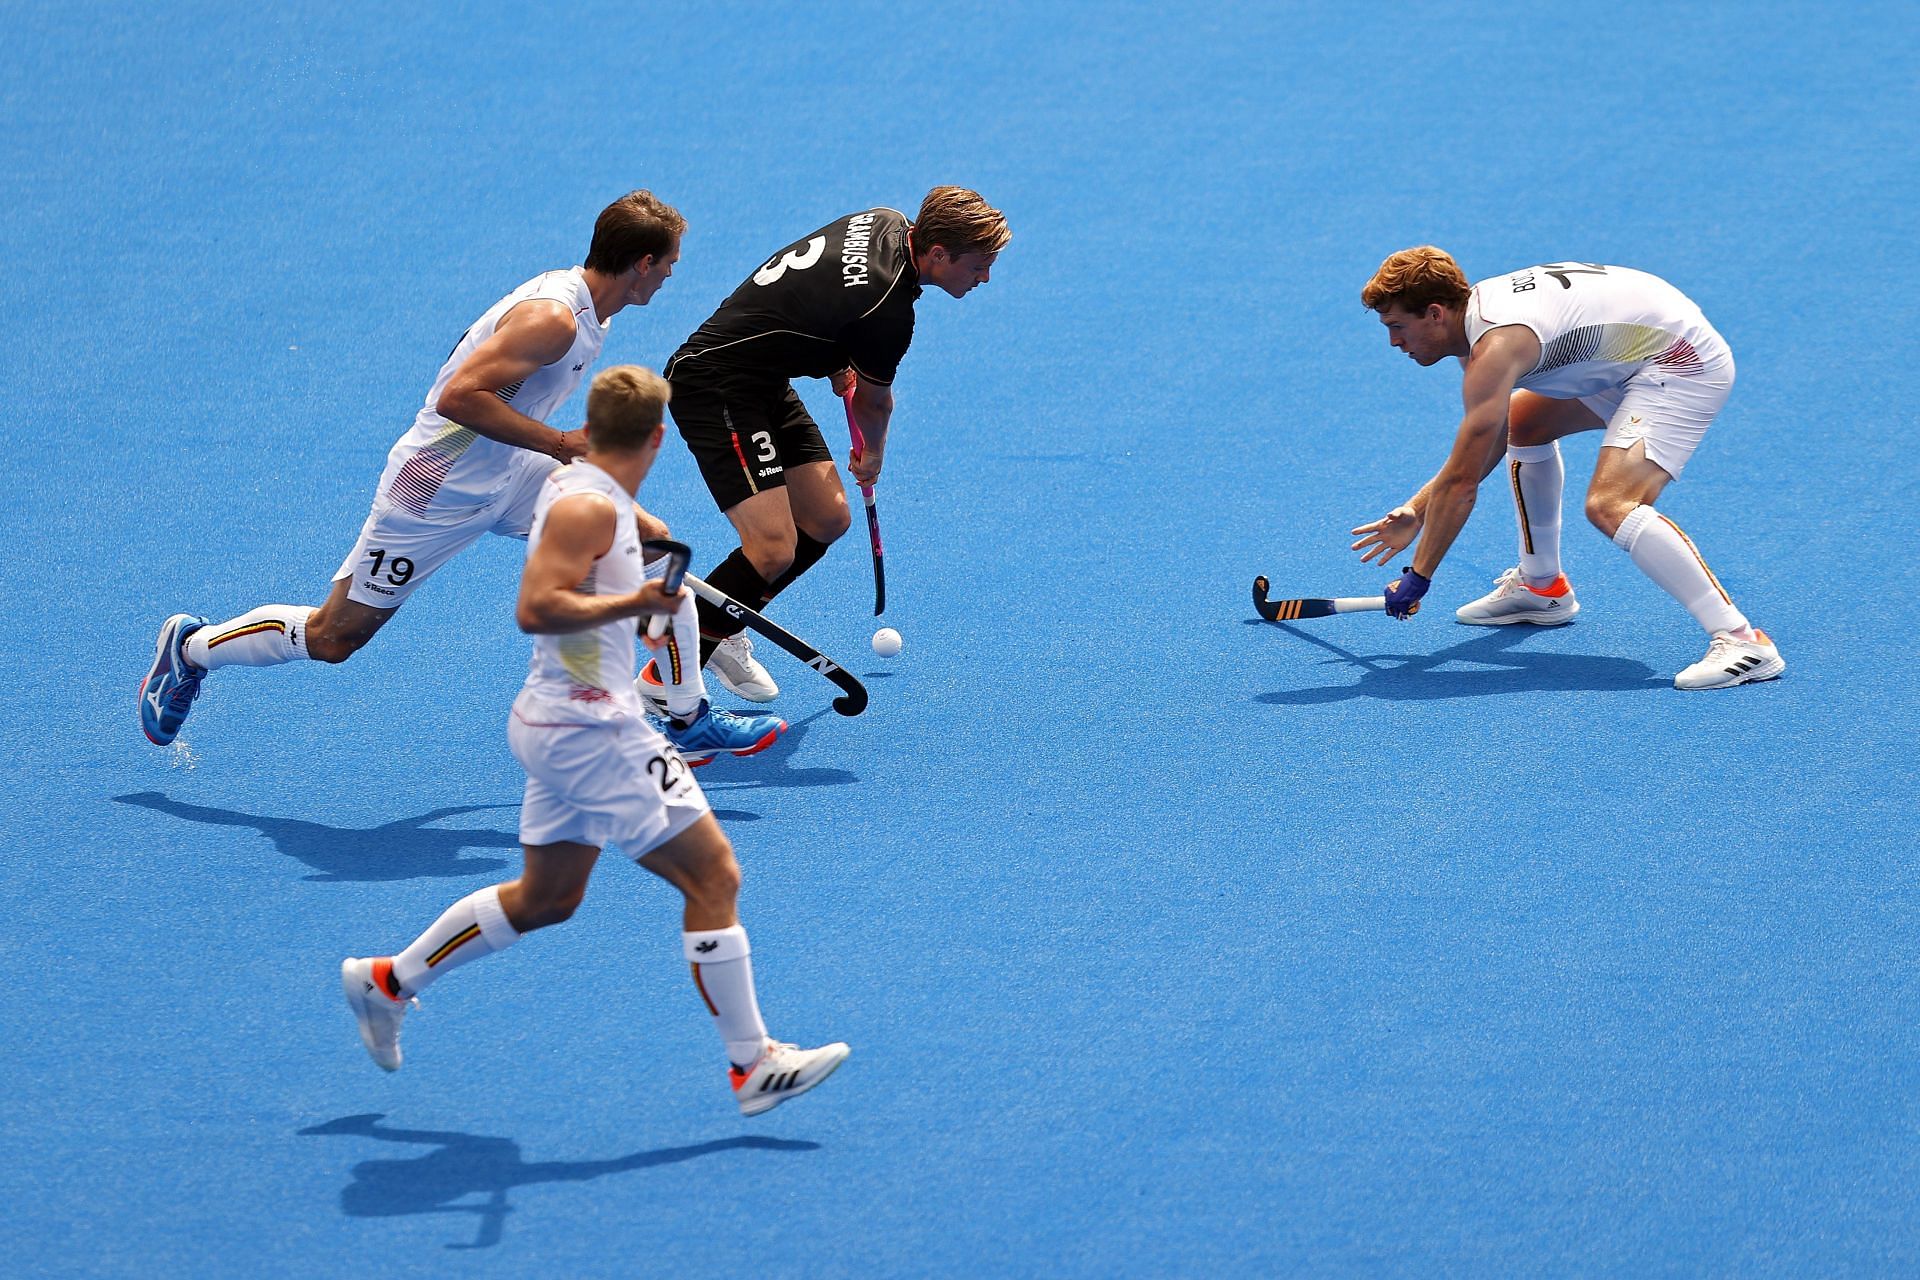 Germany vs Belgium, Hockey World Cup 2023 GER vs BEL match preview, team news and score prediction